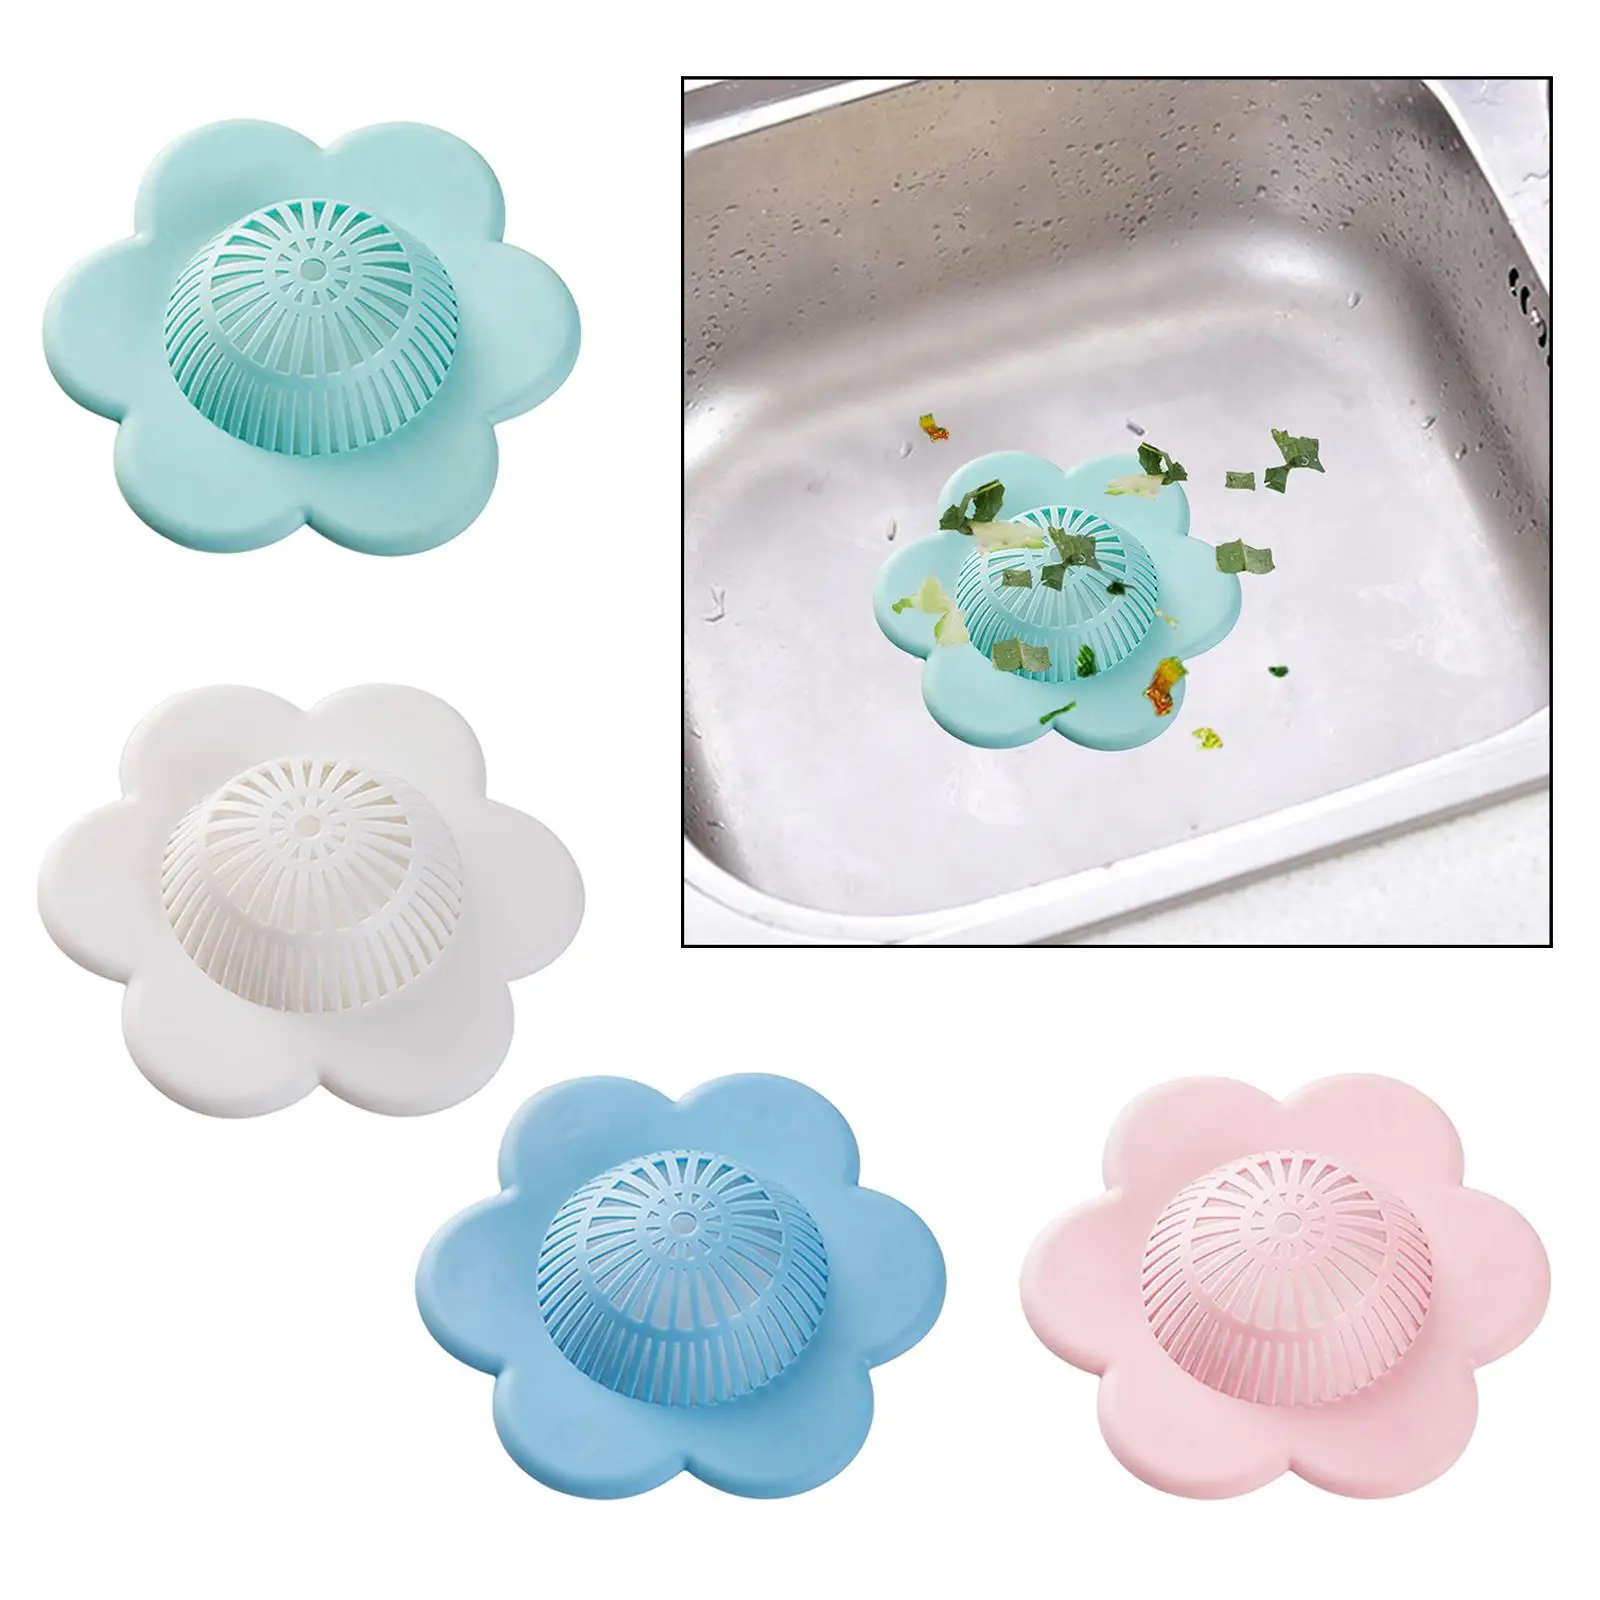 Effective hair catchers Filter Shower Drain Covers for Bathroom Home Kitchen Household